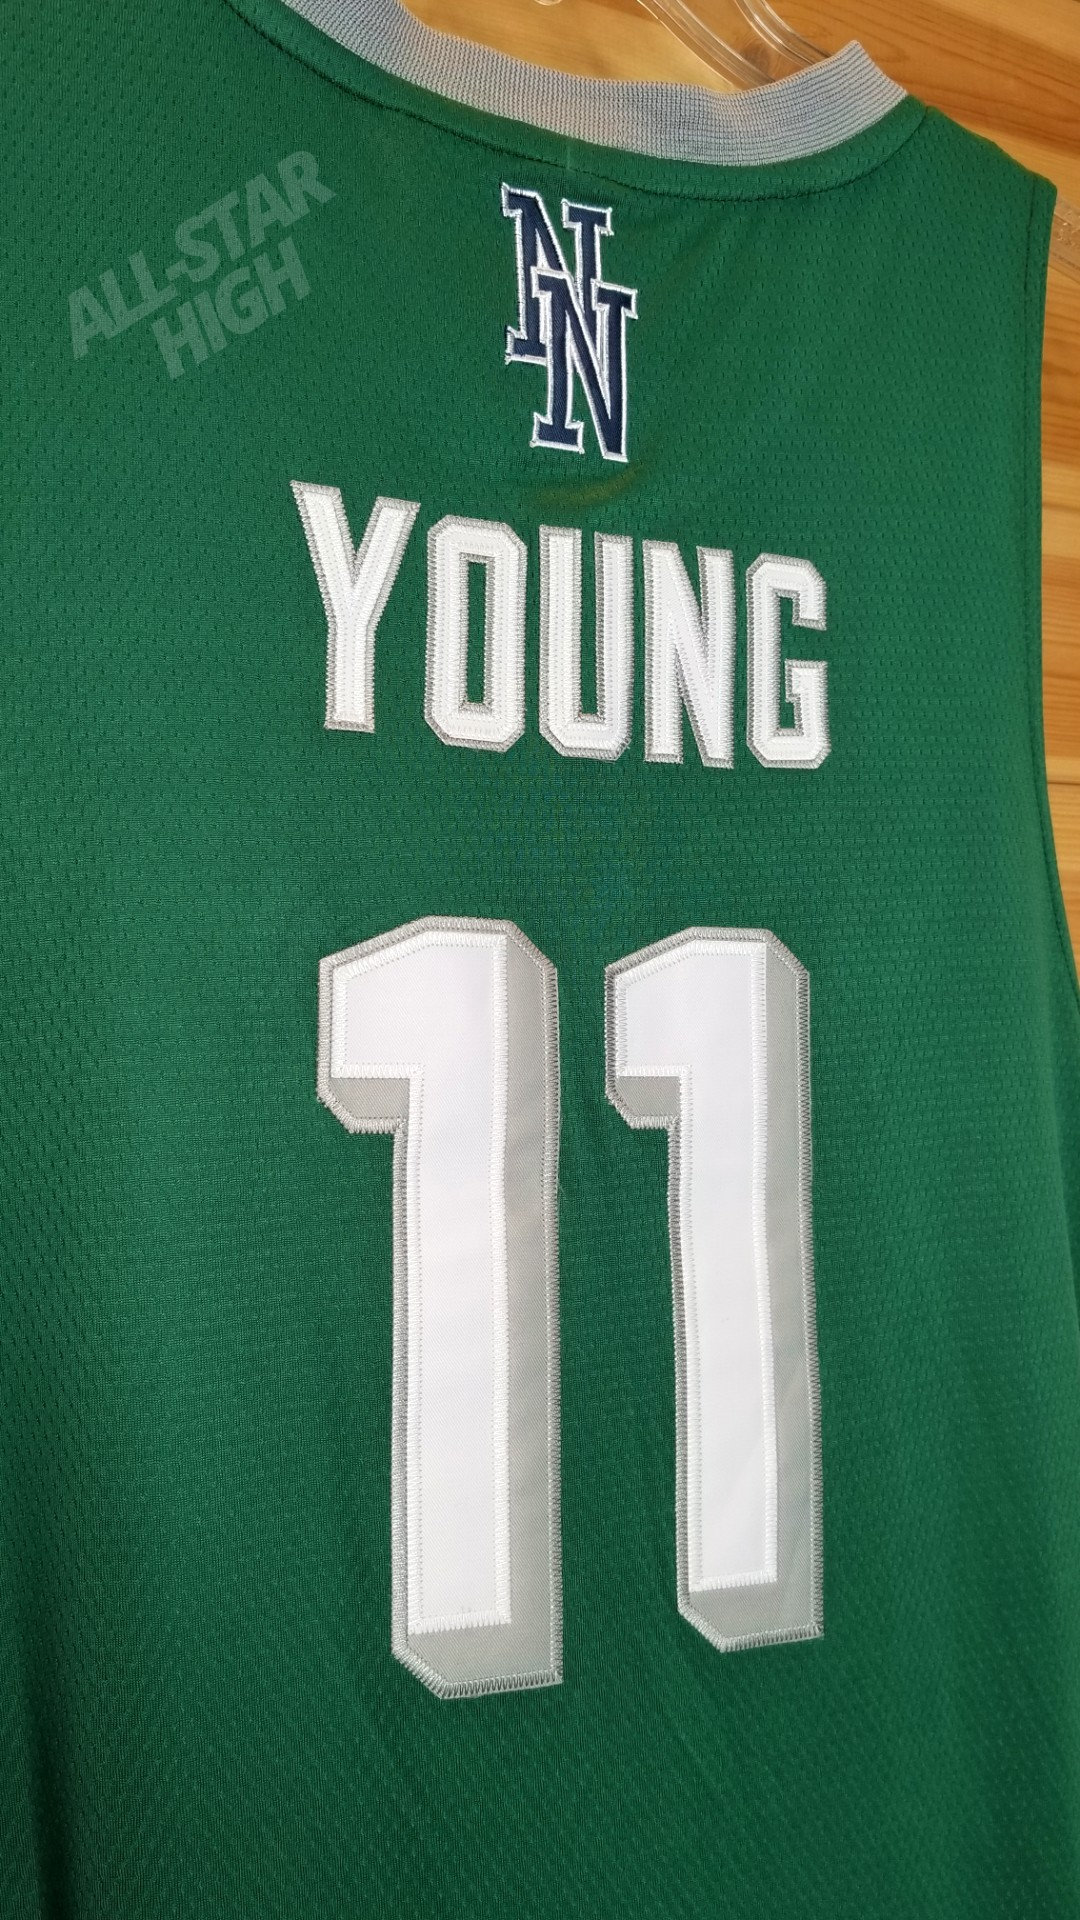 Trae Young 11 Norman North High School Timberwolves White Basketball Jersey  — BORIZ